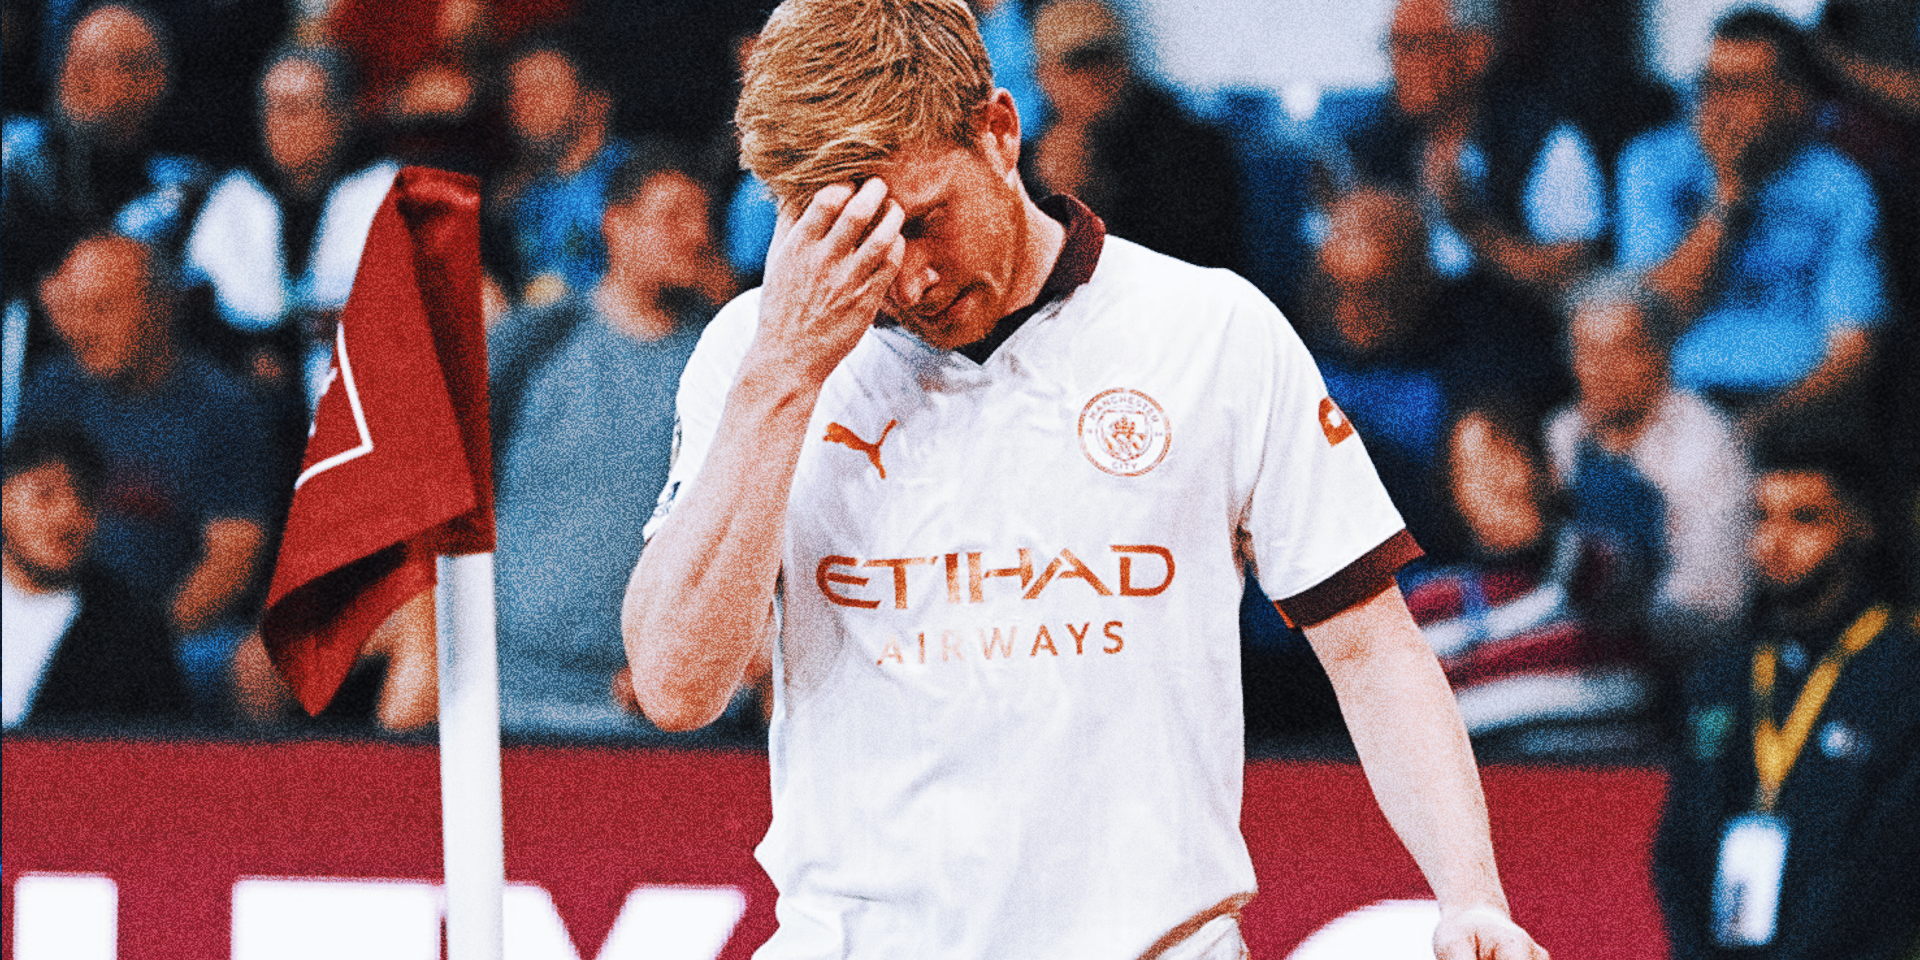 Man City's De Bruyne out for '3 or 4 months' with hamstring injury